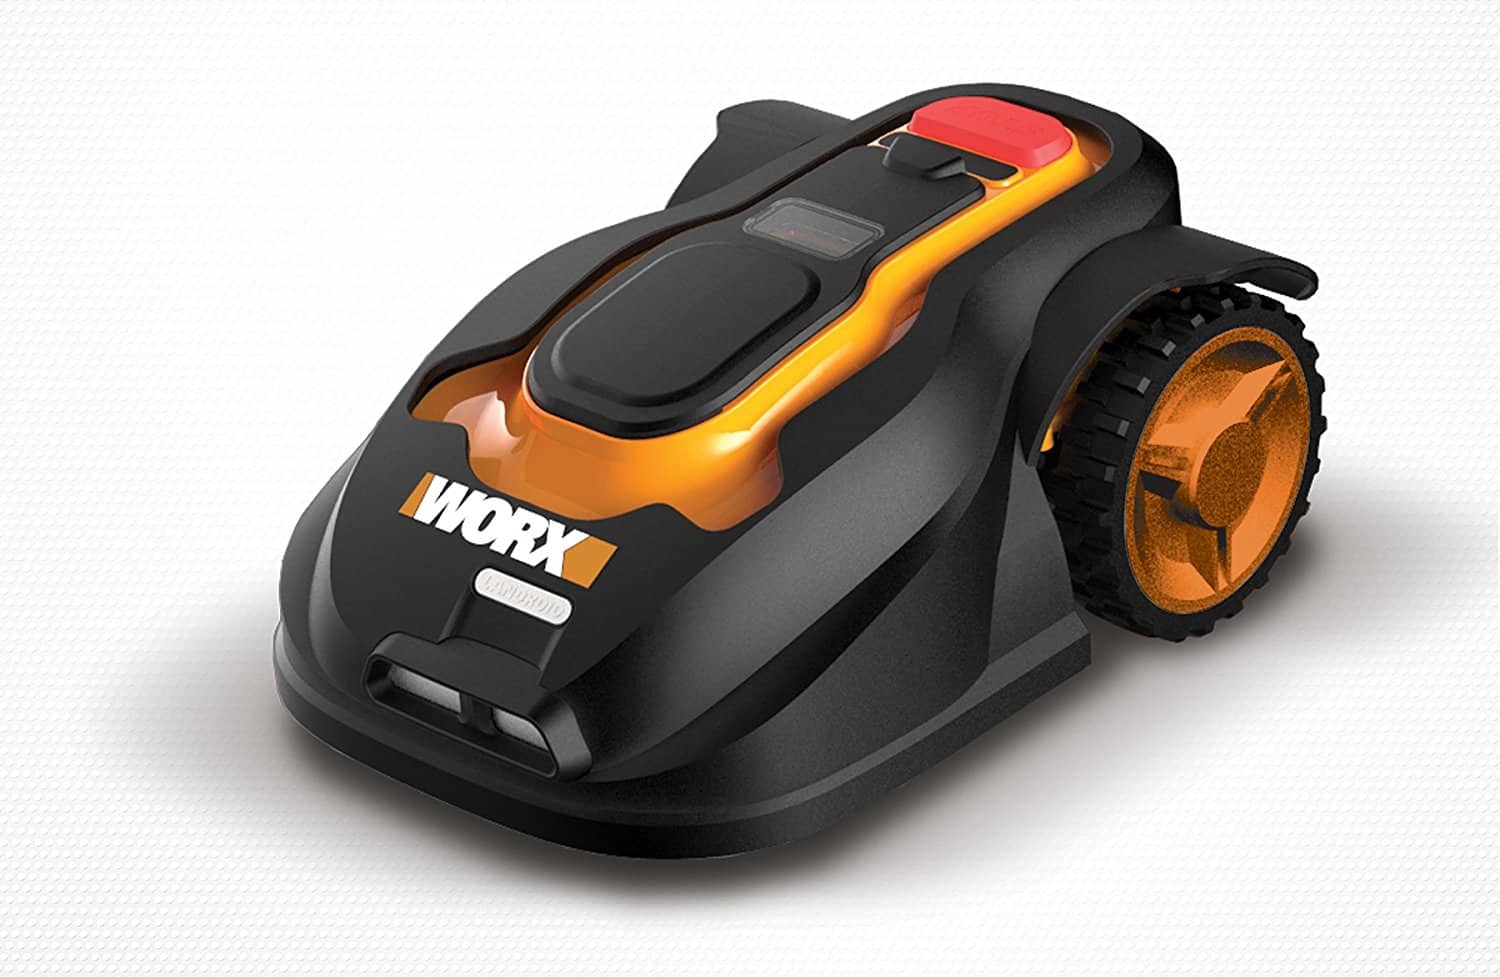 WORX WG794 Landroid Review